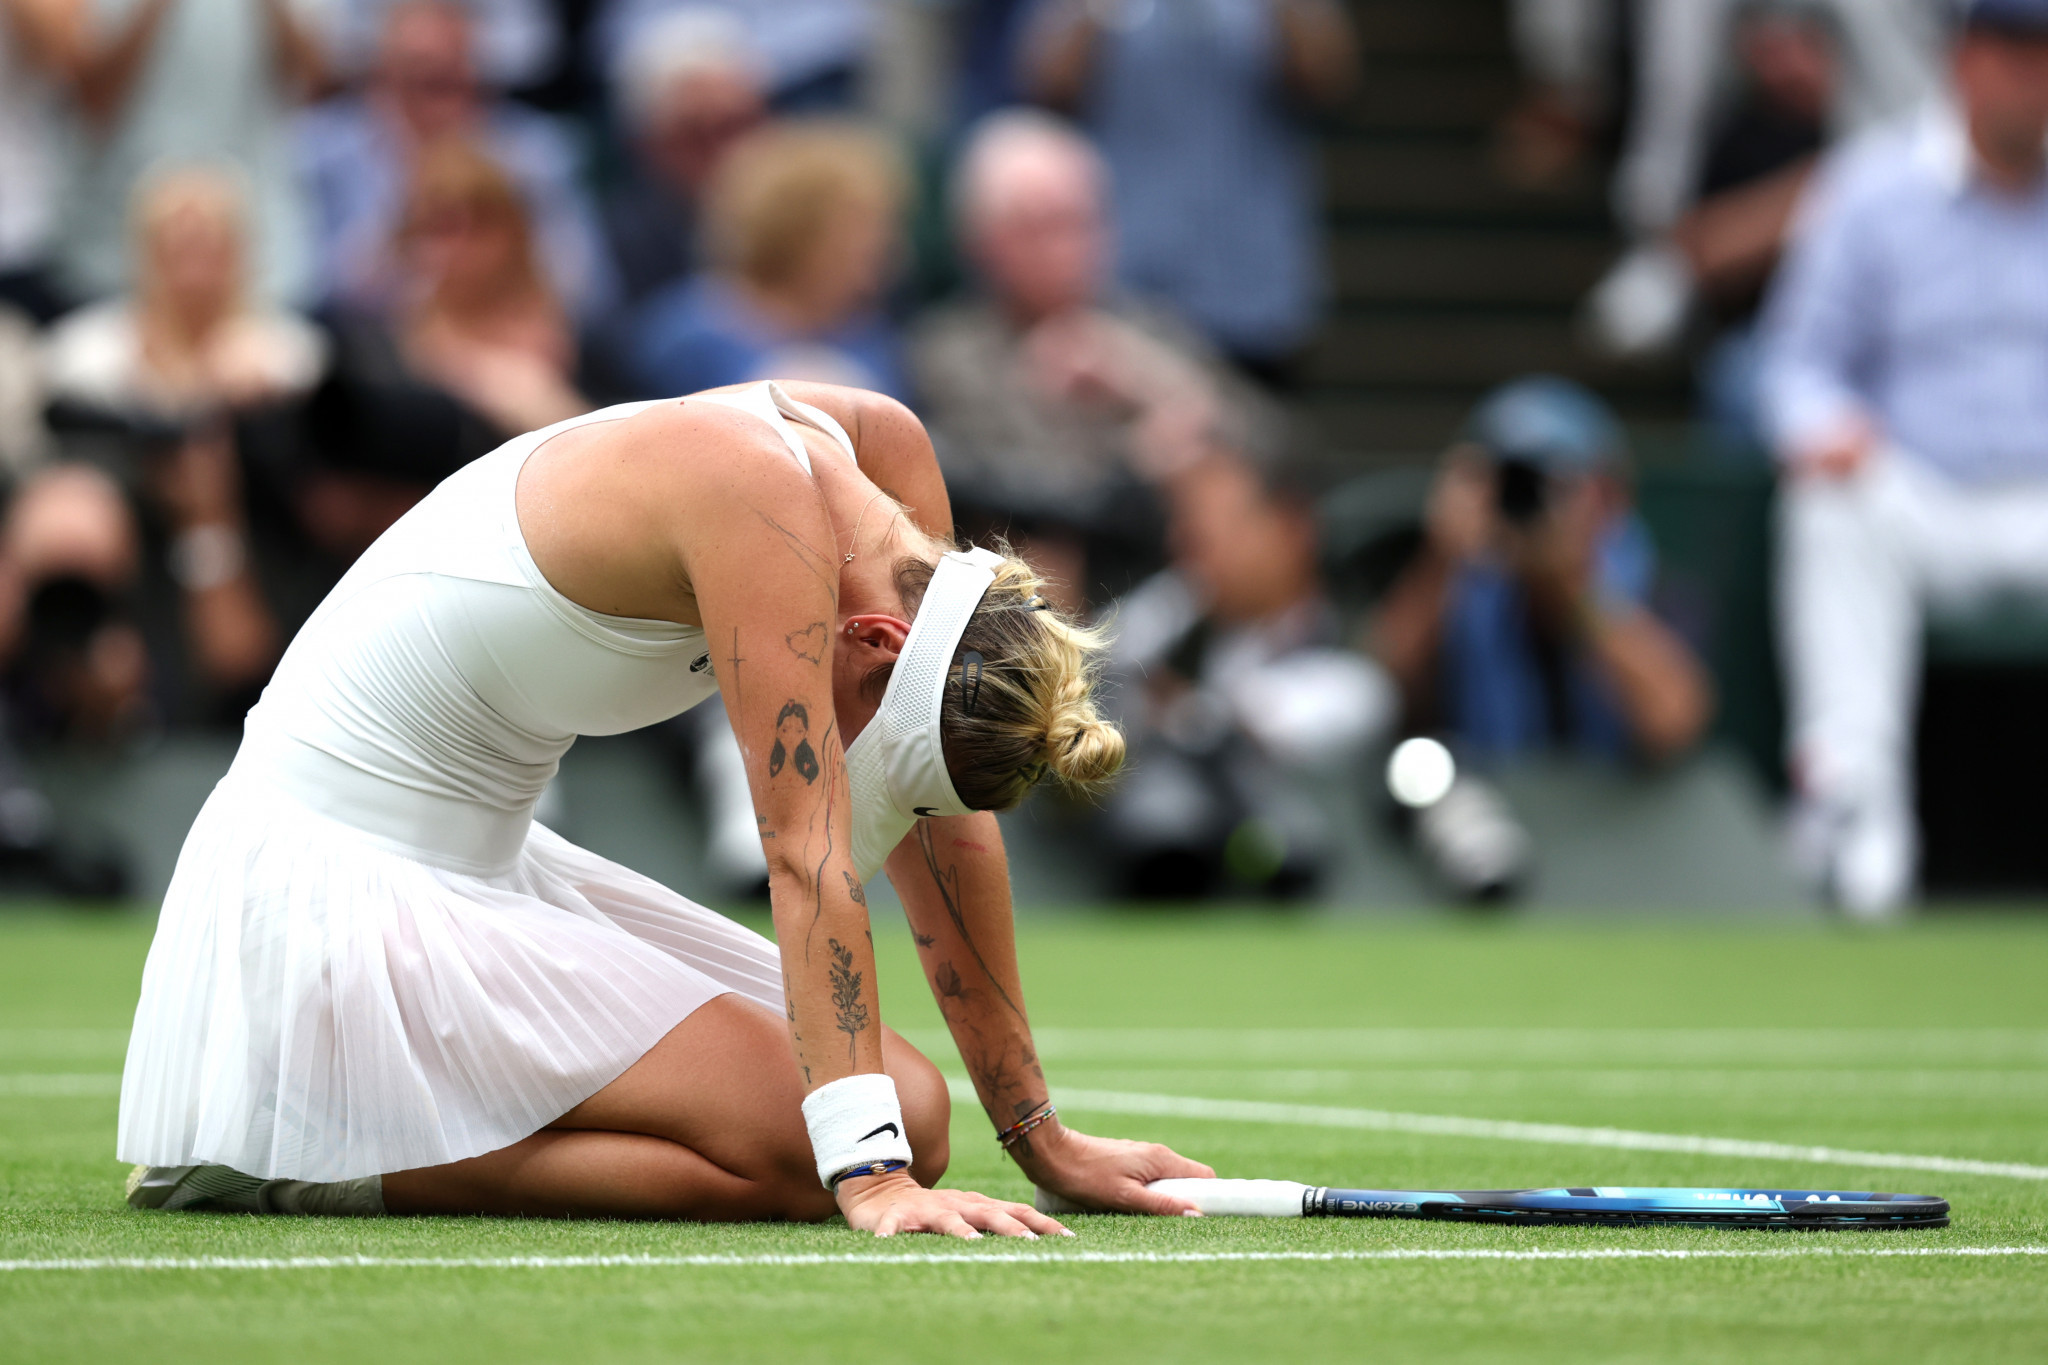 An emotional Markéta Vondroušová goes to the ground after becoming the first unseeded player in the open era to win the Wimbledon, defeating Ons Jabeur for the women's singles title ©Getty Images